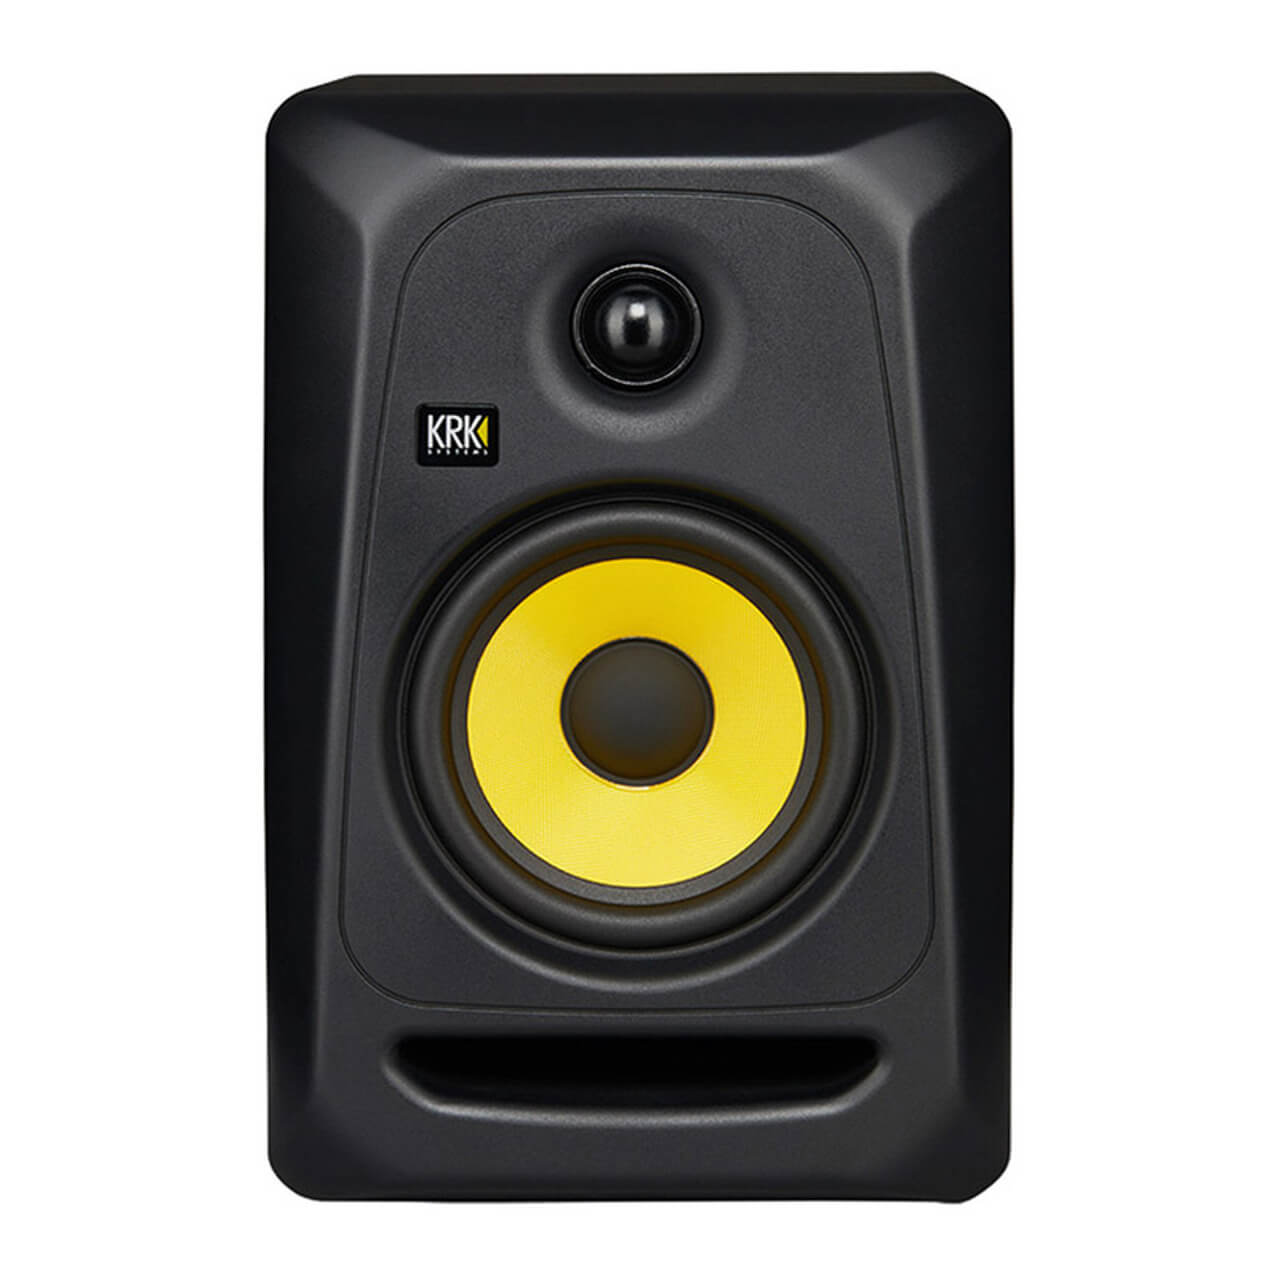 The KRK Classic 5's are the best studio monitors for electronic music production.